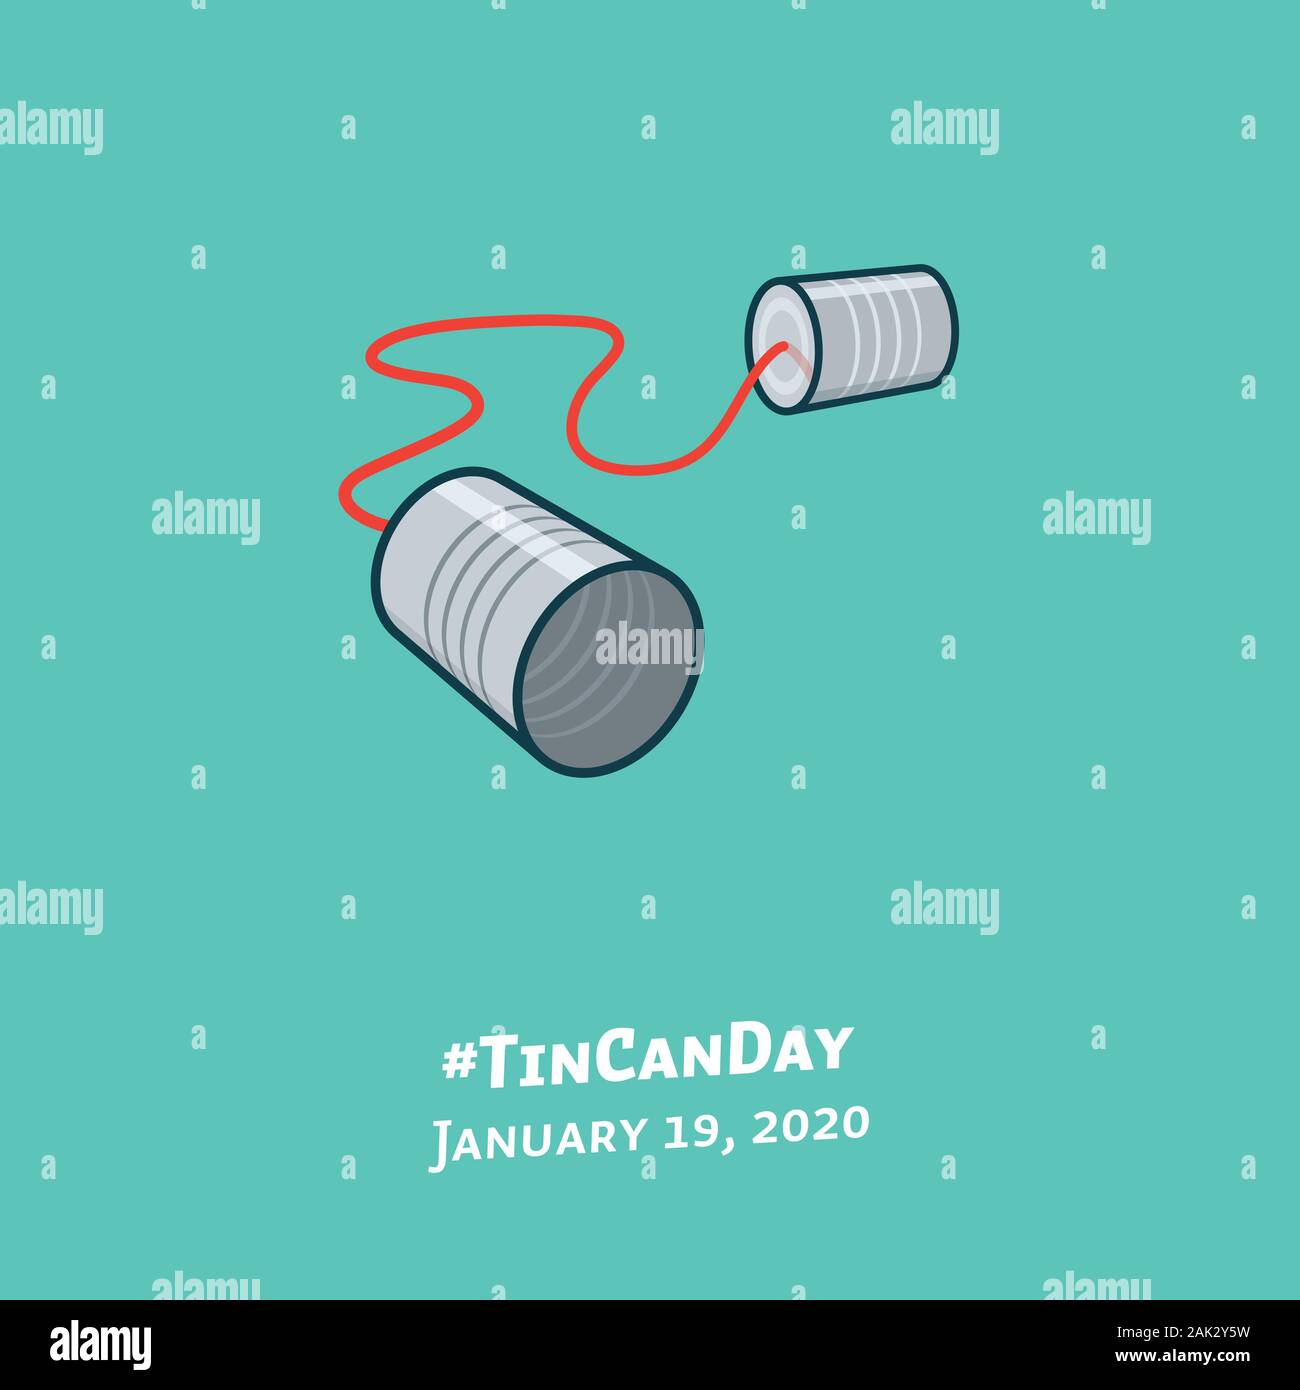 Tin can phone illustration for #TinCanDay on January 19. Communication and retro technology color vector symbol. Stock Vector